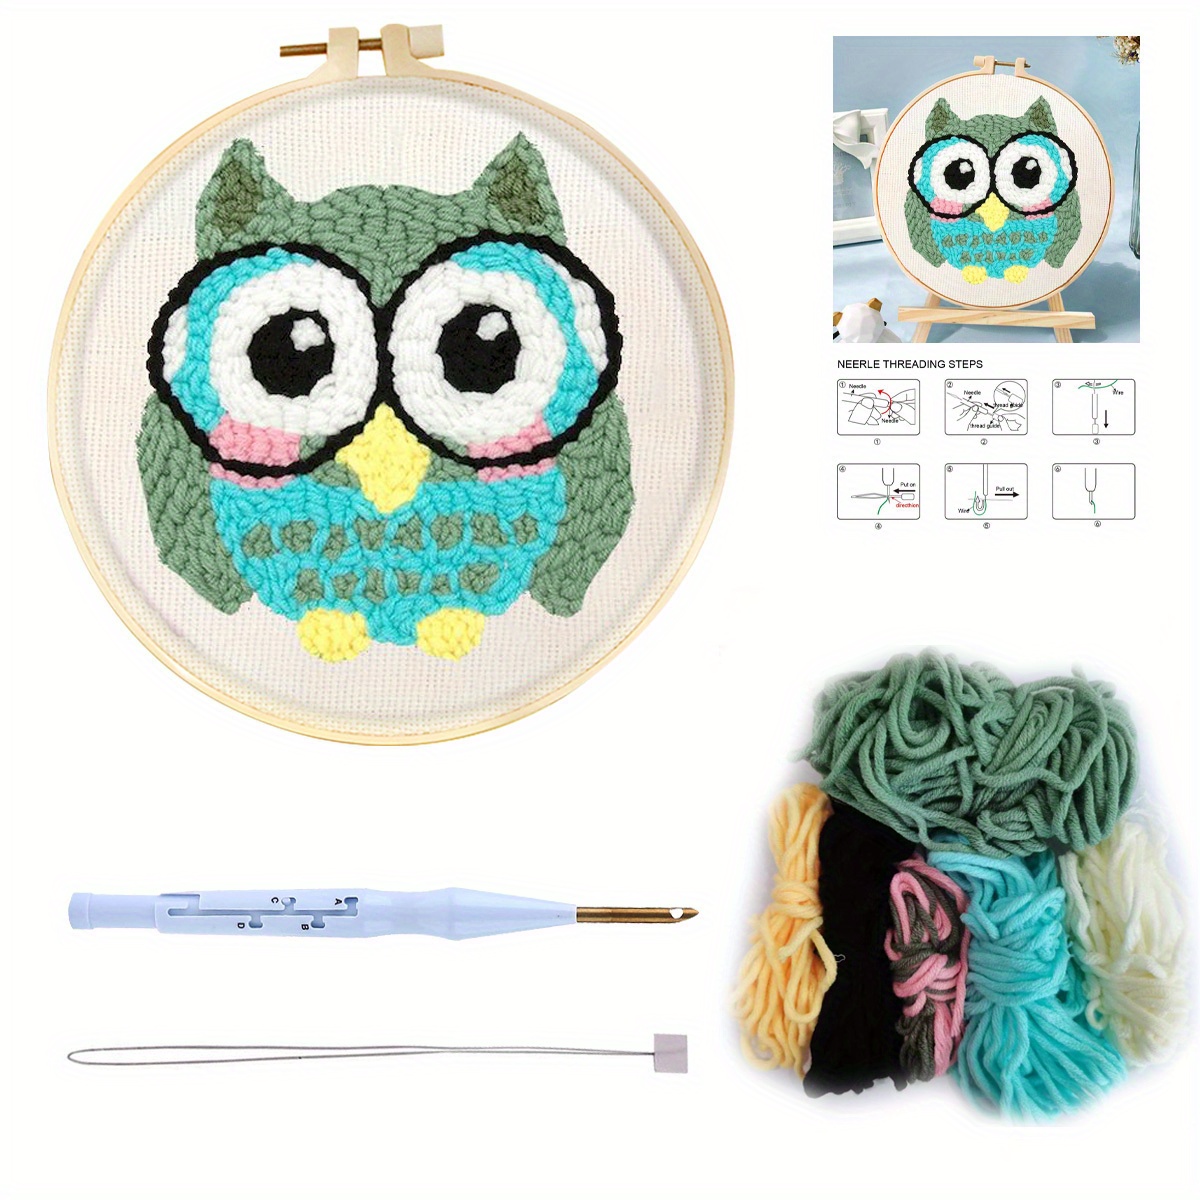 DACUN DIY Punch Embroidery Kits for Adults Cartoon Pattern Hooking